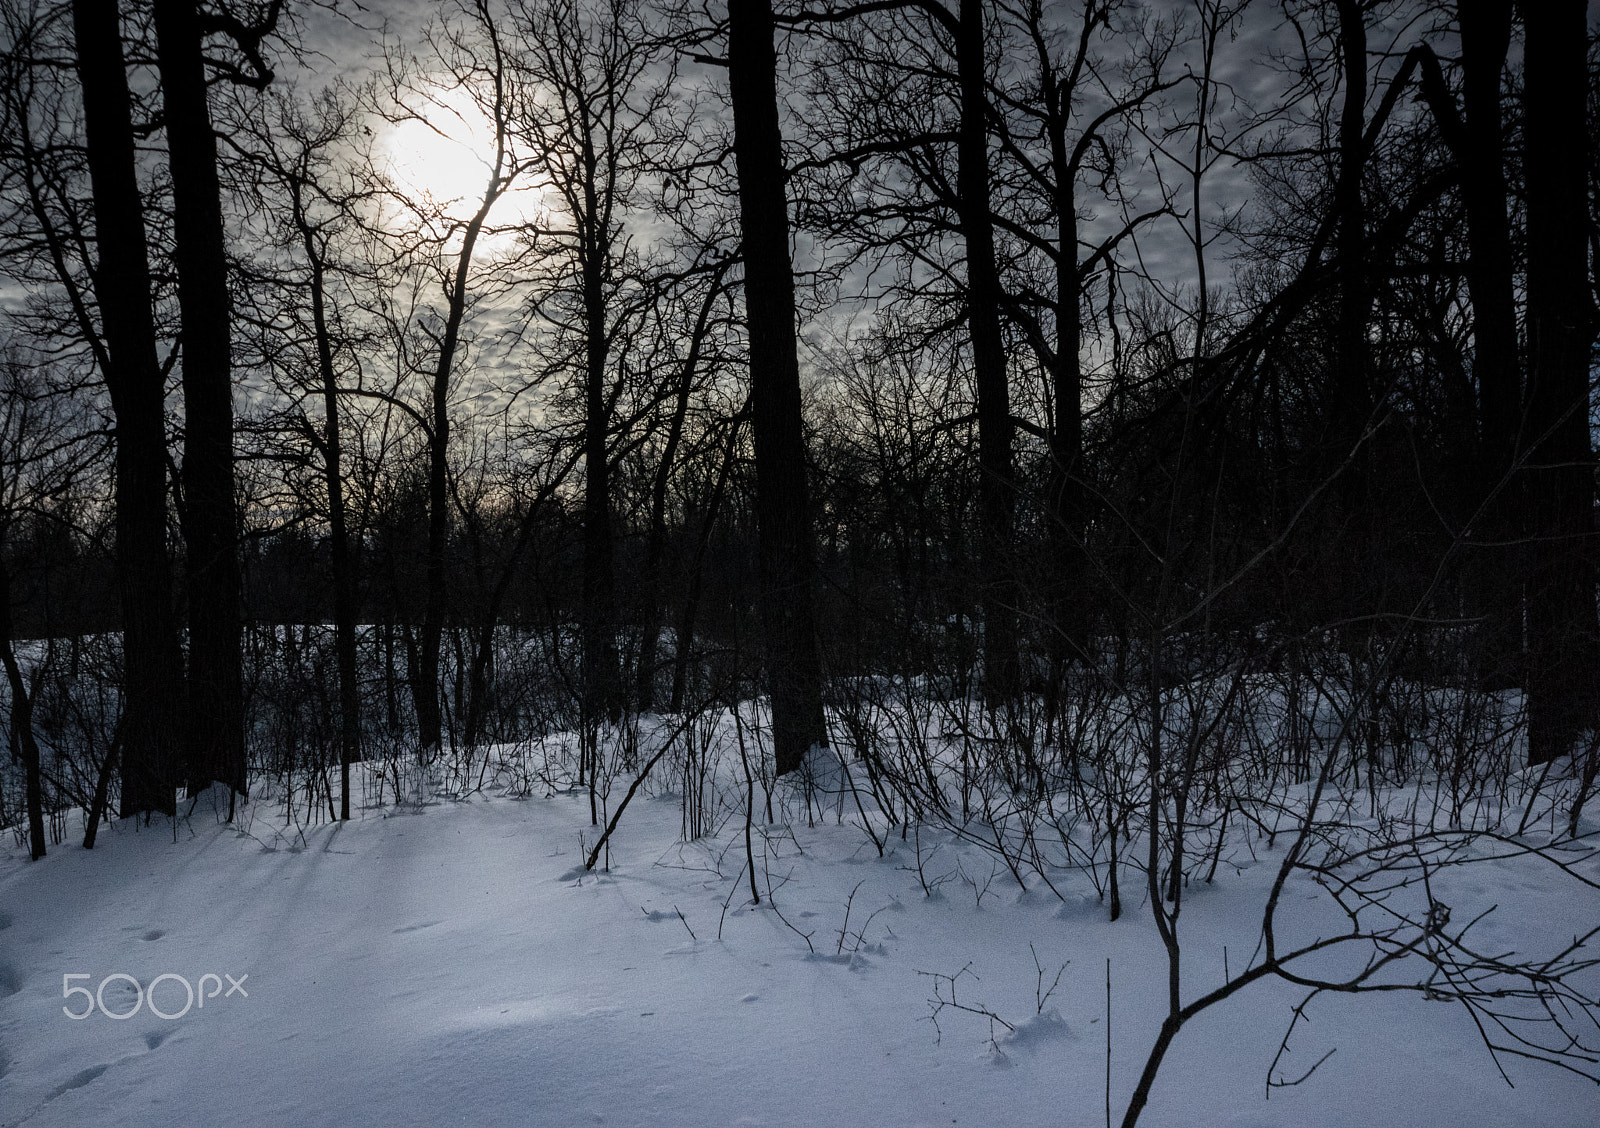 Pentax K-3 II sample photo. Late winter afternoon photography